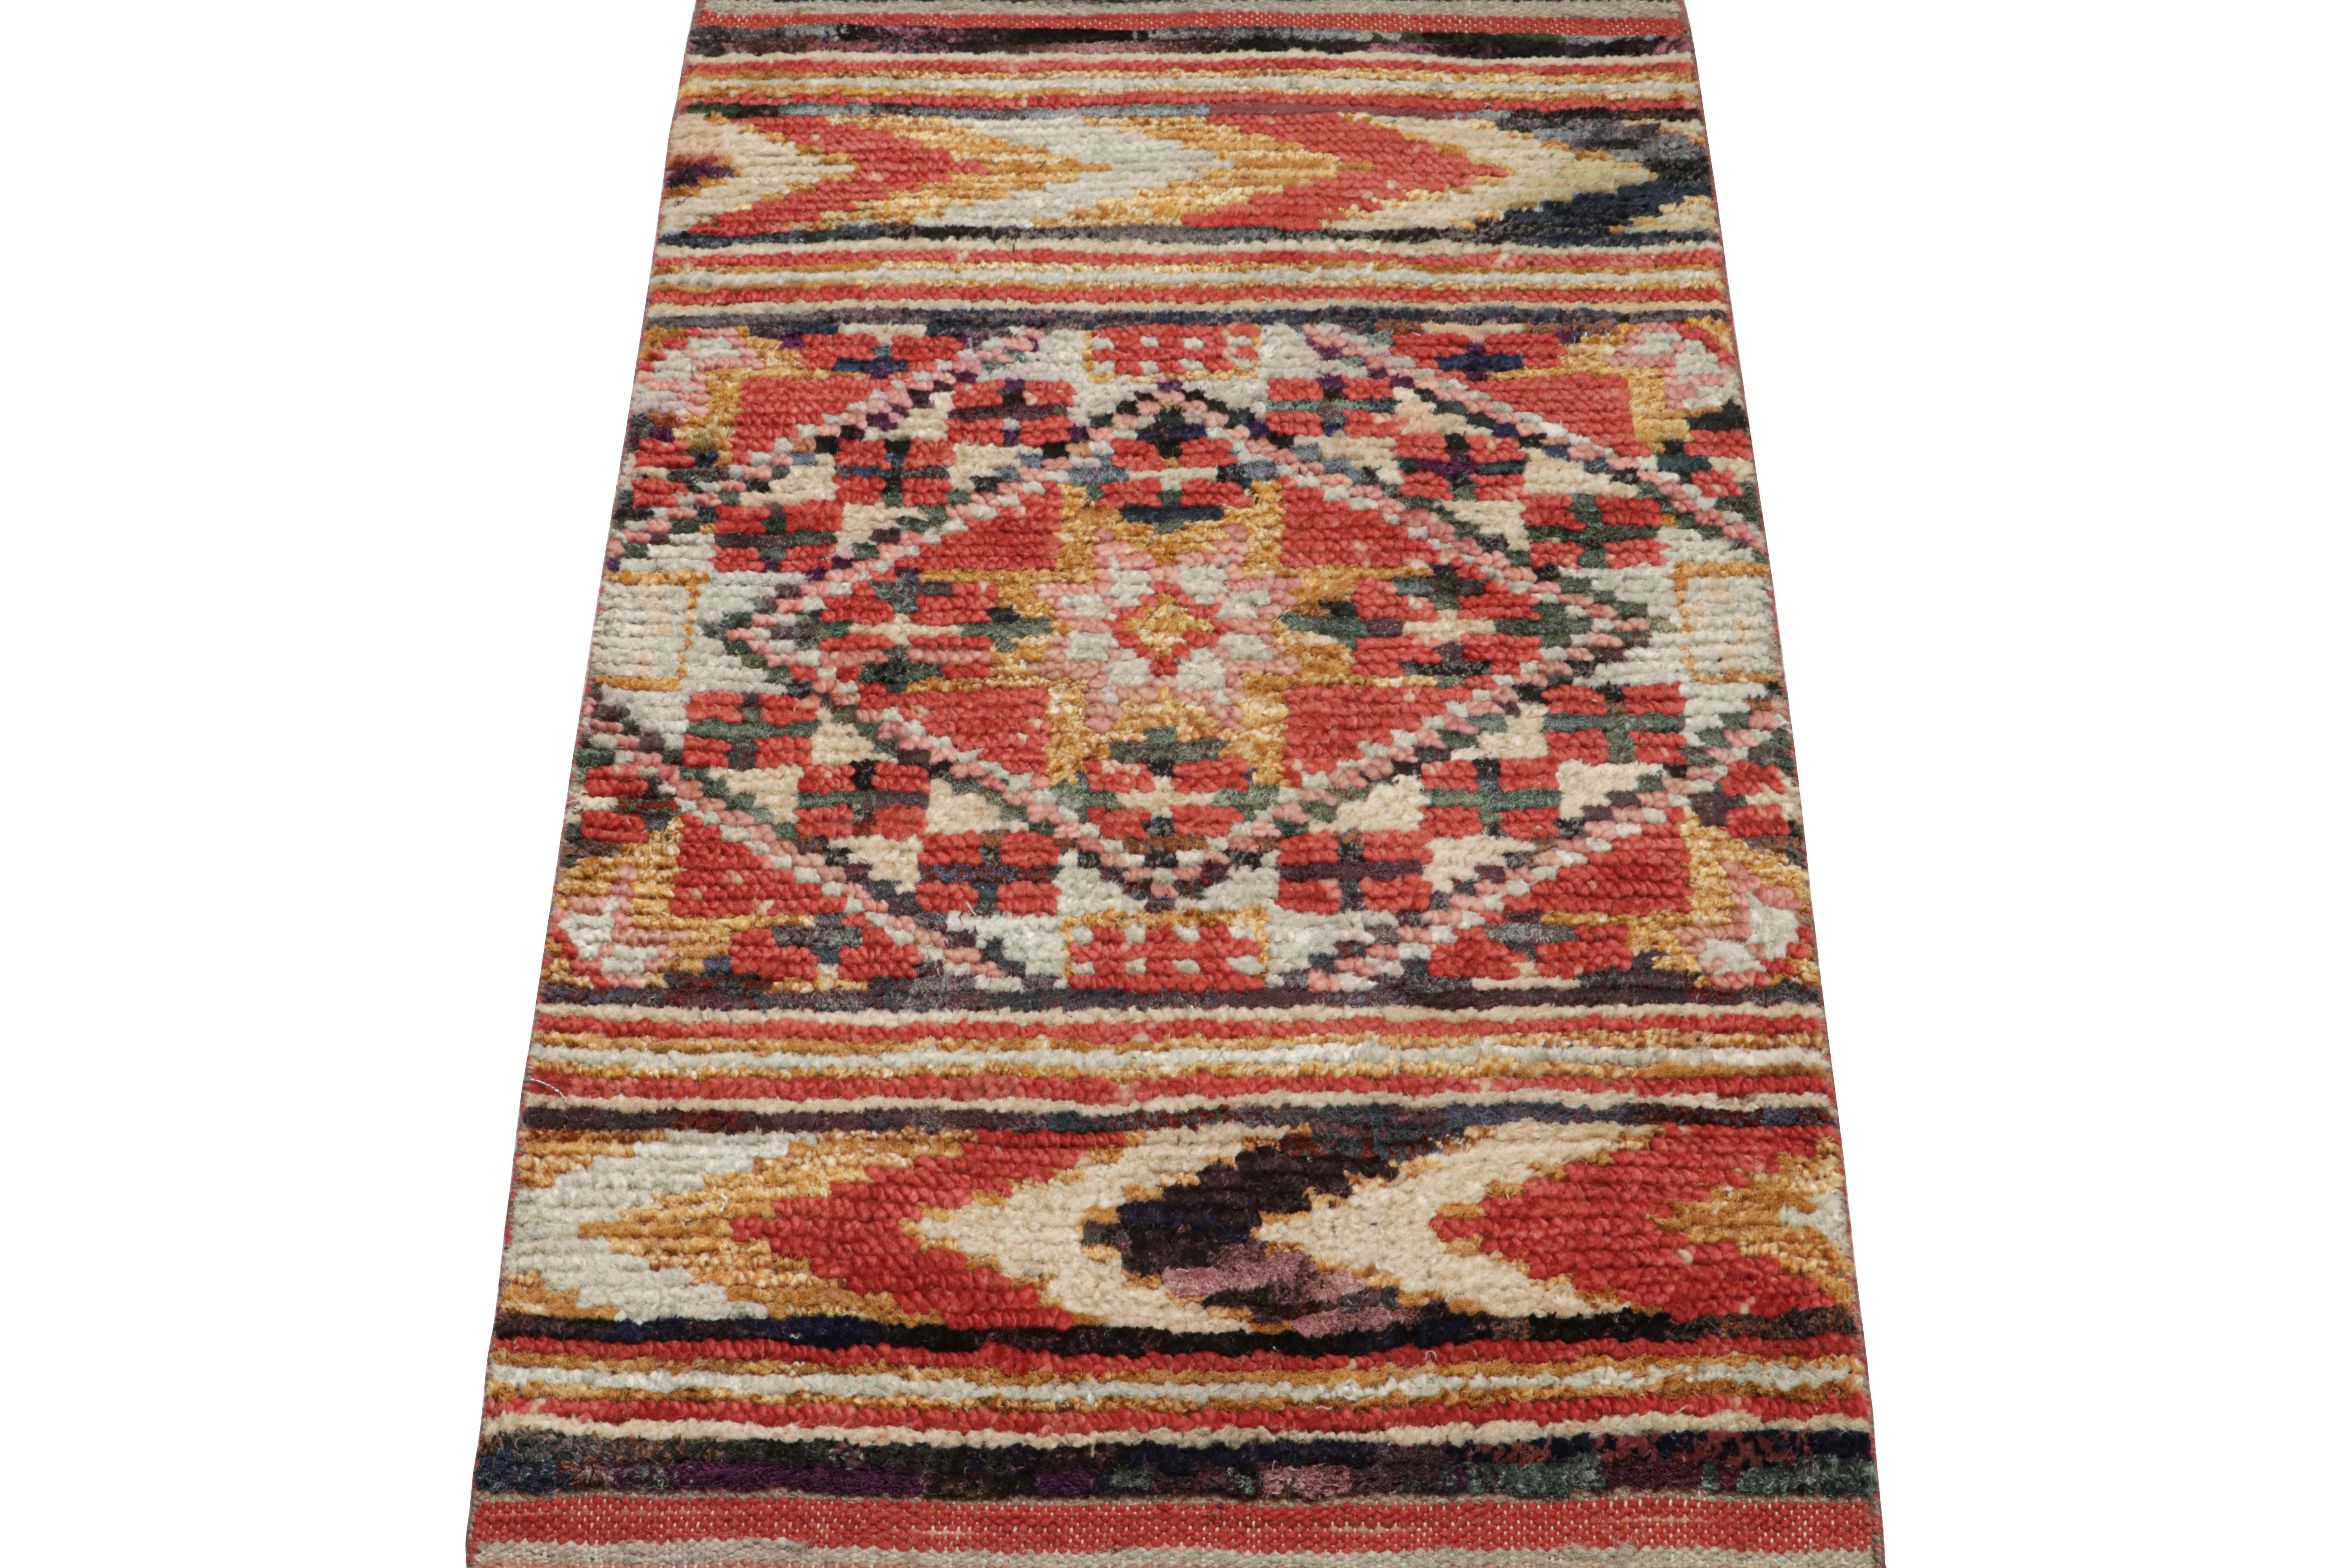 Hand-knotted in wool and silk, this 2x4 Moroccan rug features geometric patterns inspired by primitivist Berber weaving traditions and same ribbed texture drawing on Boucherouite sensibilities. 

On the Design:

Connoisseurs may admire the subtle